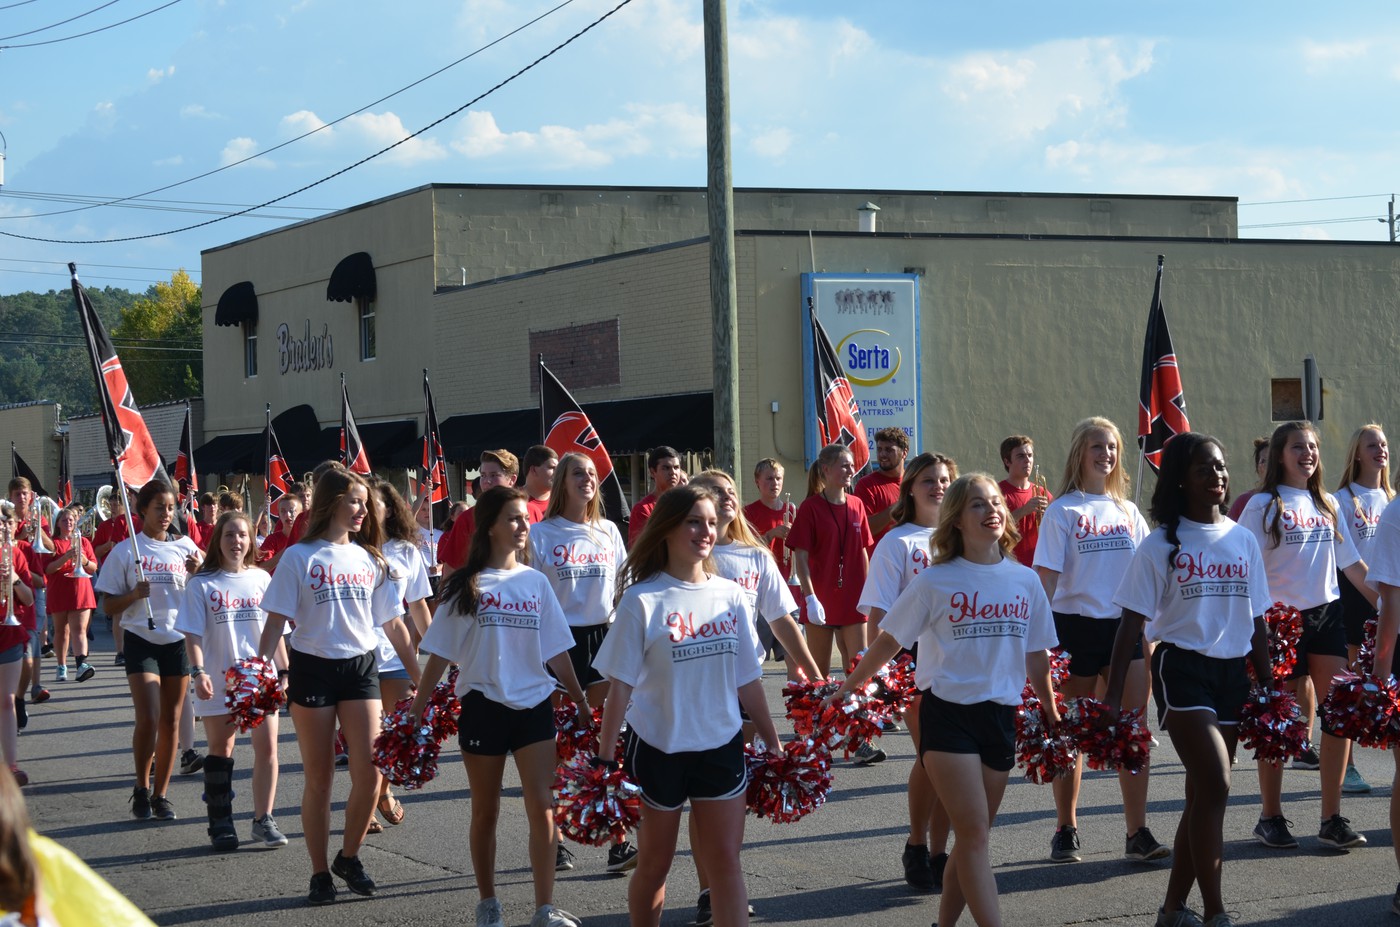 Hewitt-Trussville High School homecoming parade cancelled due to inclement weather